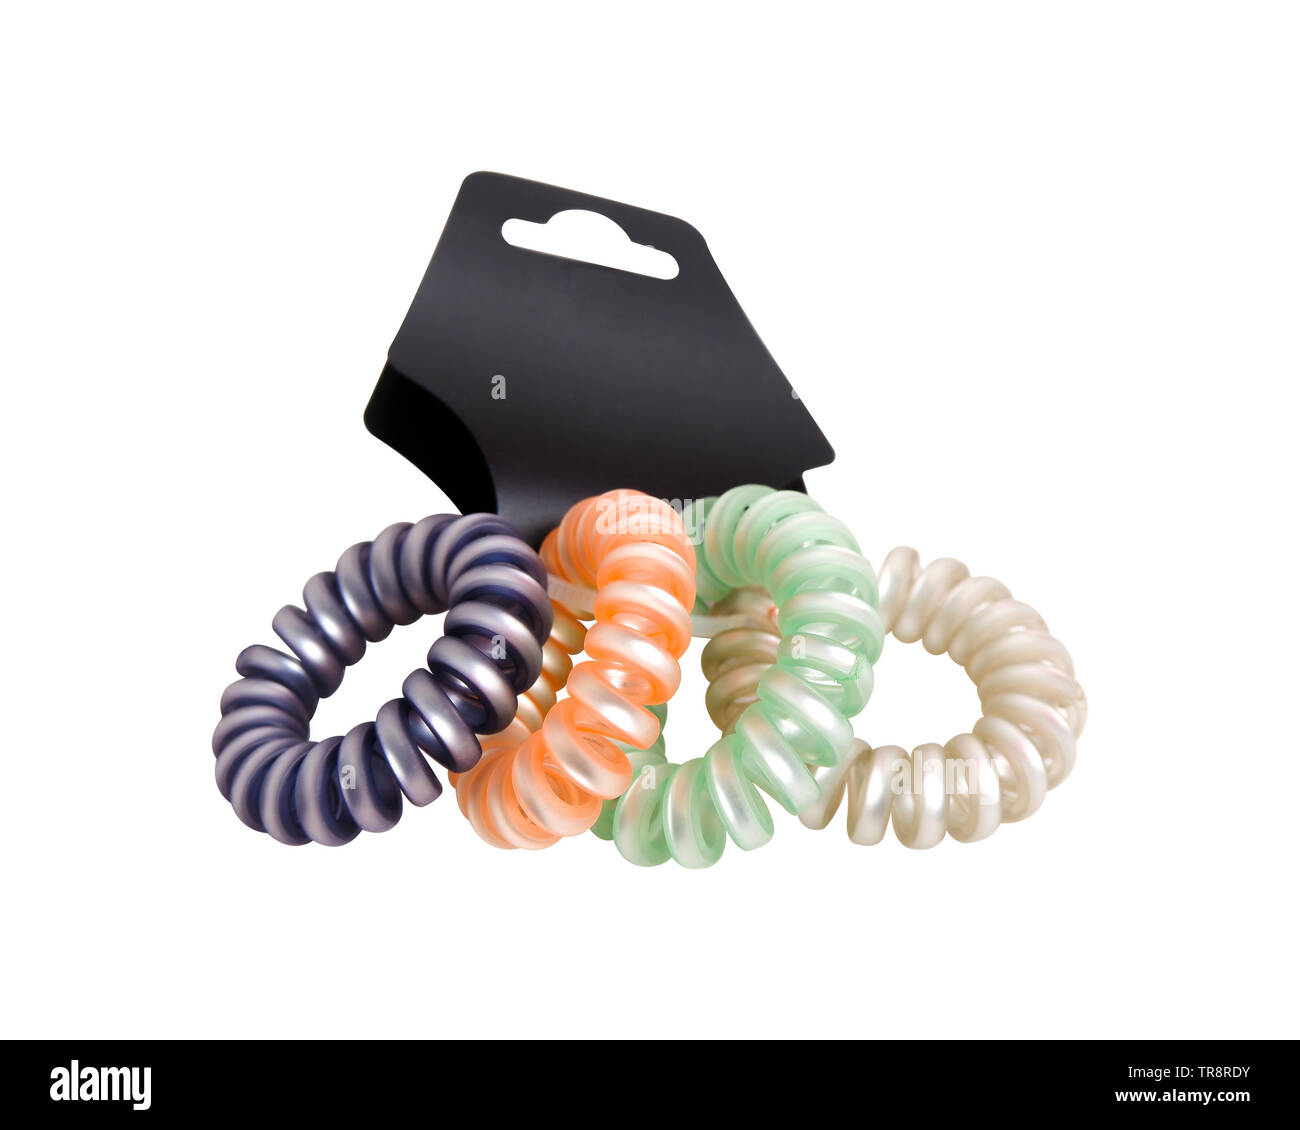 Colorful Hair Band Isolated on White Background with Clipping Path. Closeup of Spiral Four Colorful Rubber Bands for Fashion Accessories. Beautiful Stock Photo